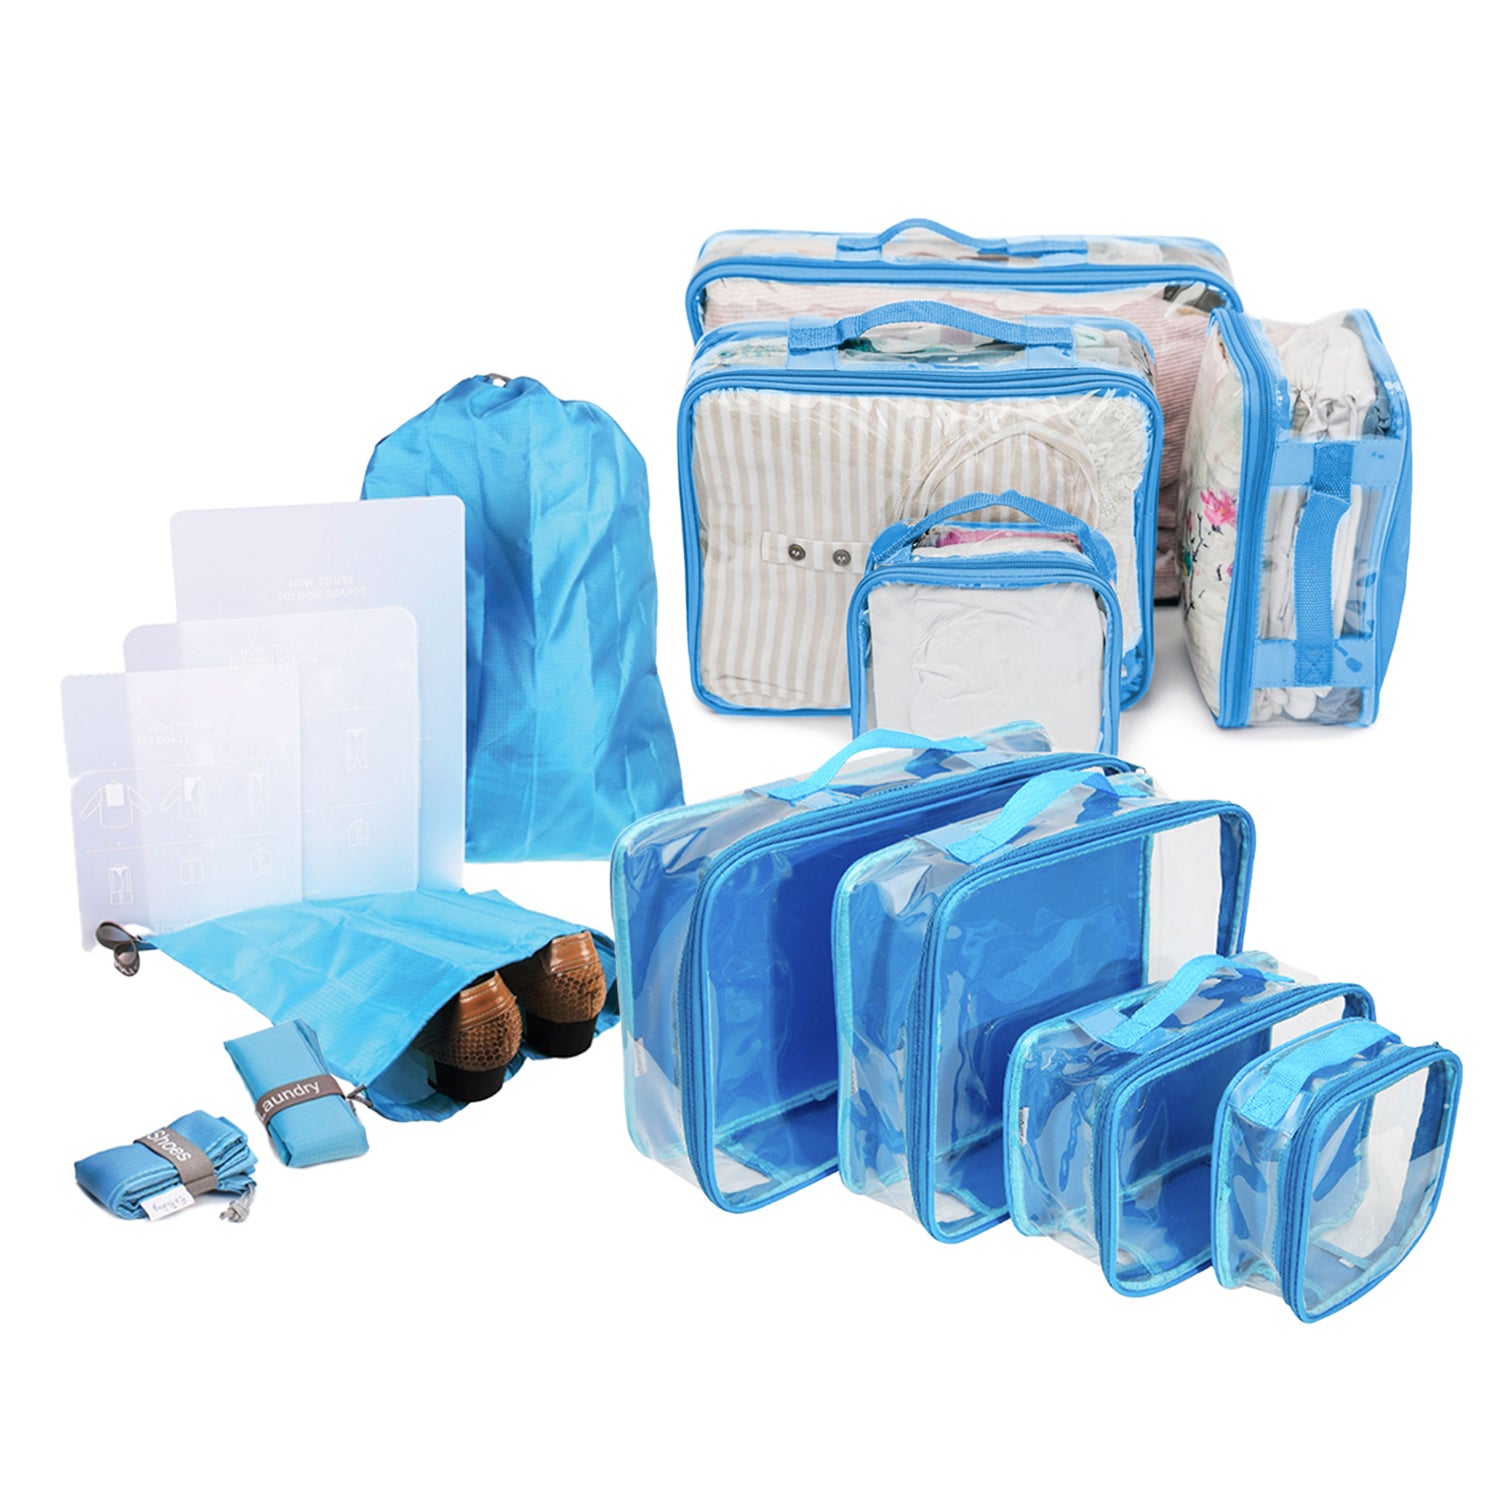 Luggage Packing Organizers Packing Cubes Set for Travel